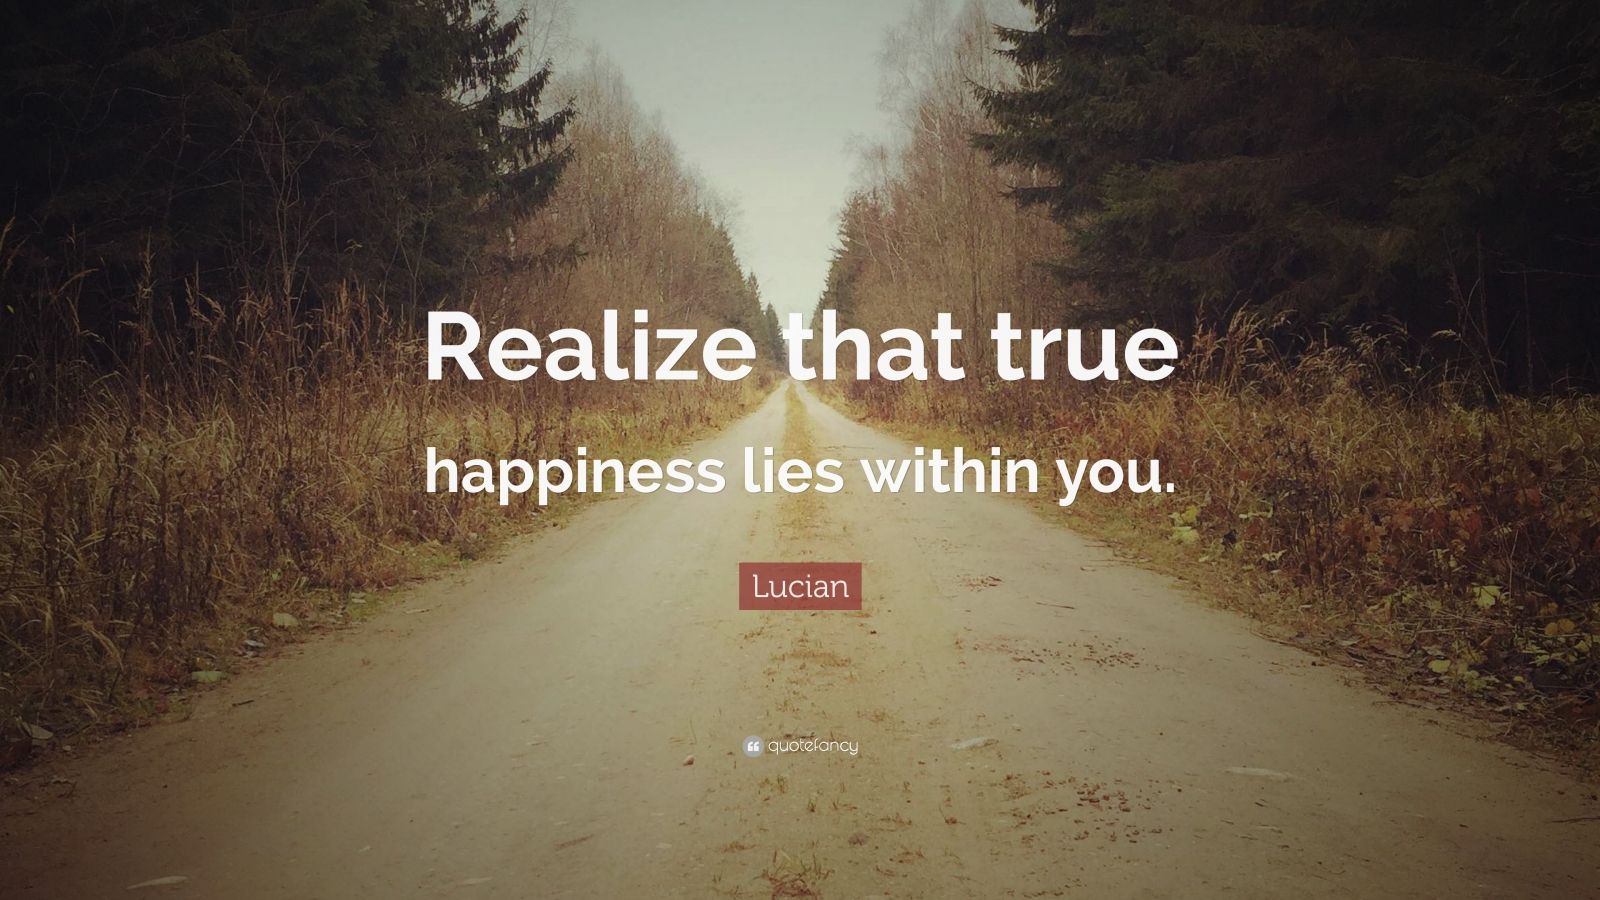 Lucian Quote: “Realize that true happiness lies within you.” (12